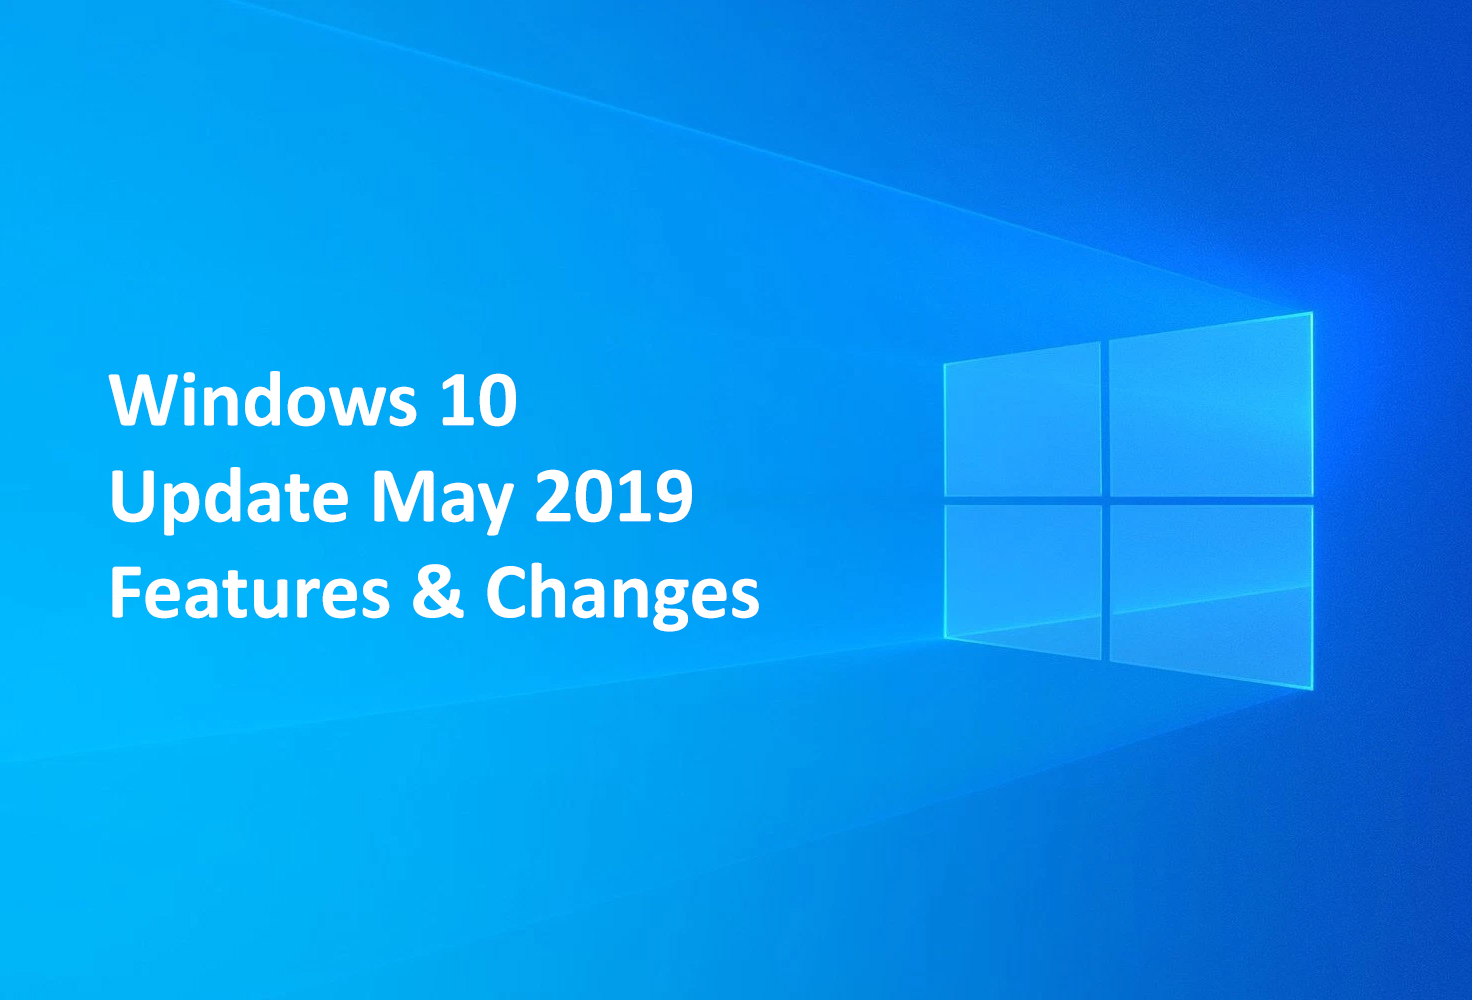 Windows 10 Update May 2019 Features and Changes